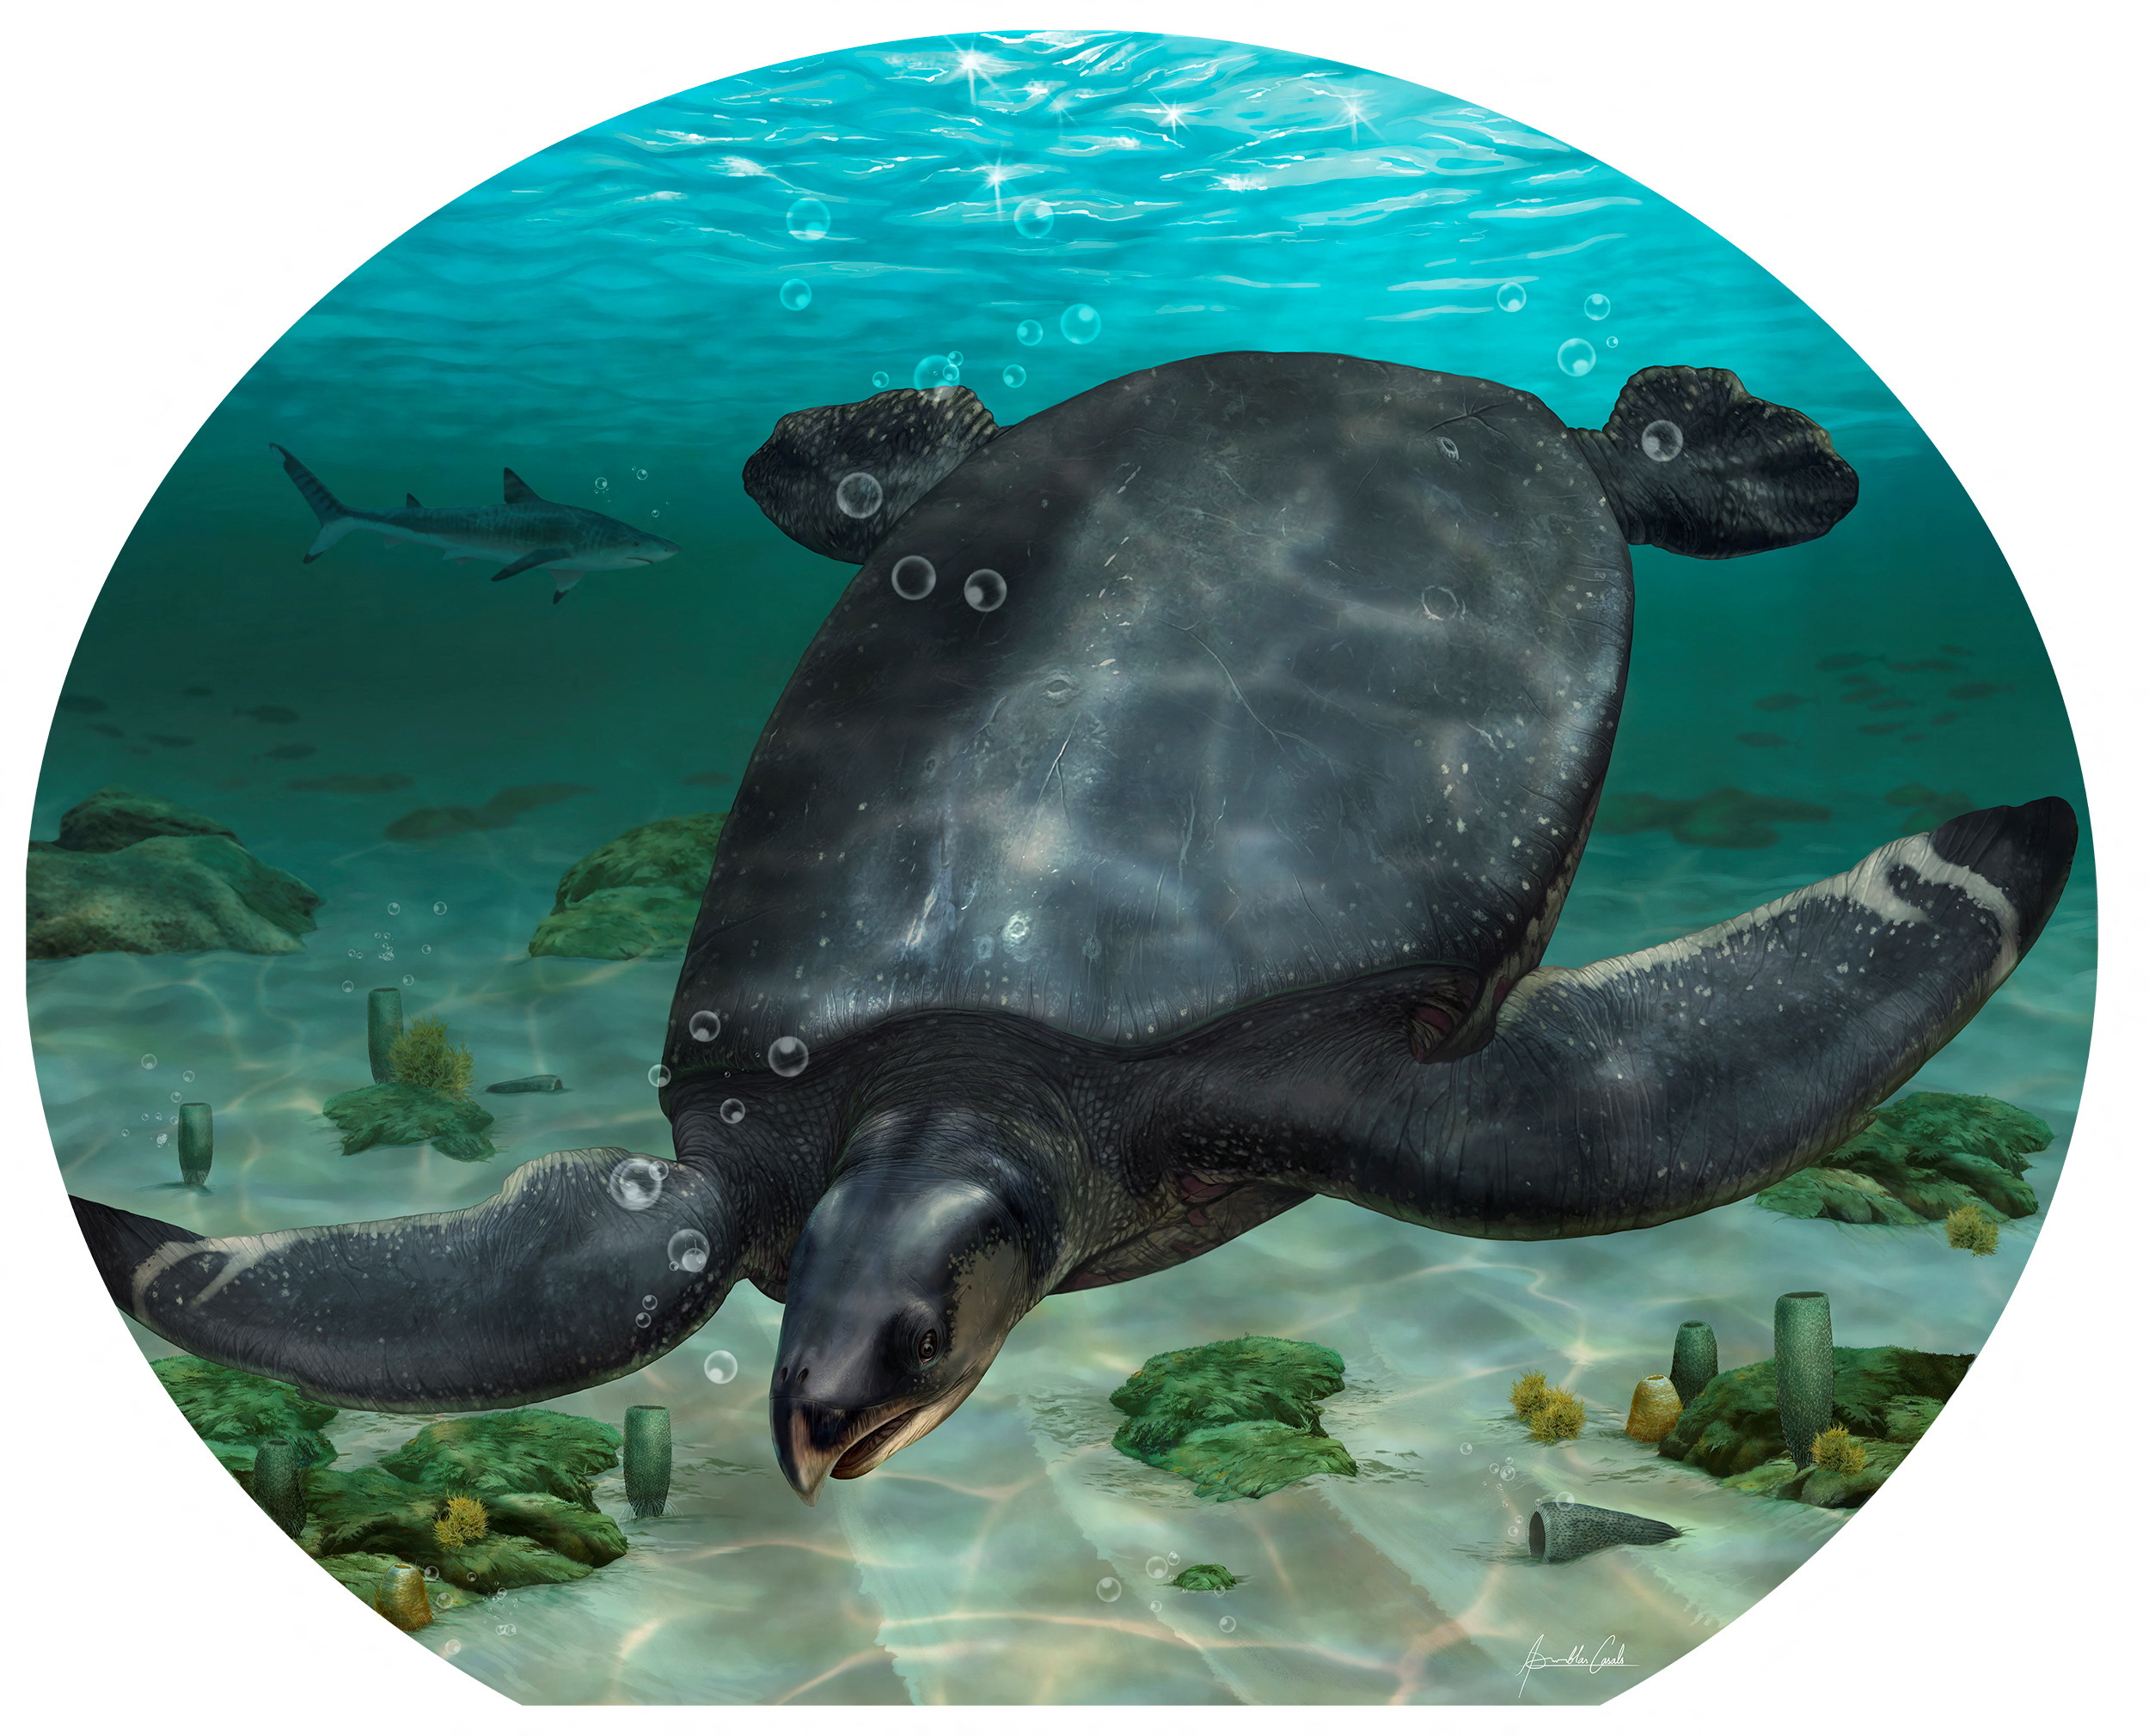 Descriptive reconstruction of Leviathanochelys aenigmatica, a large Cretaceous sea turtle that lived about 83 million years ago and its fossils were discovered in the Catalan region of Alt Urgell (REUTERS) in northeastern Spain.